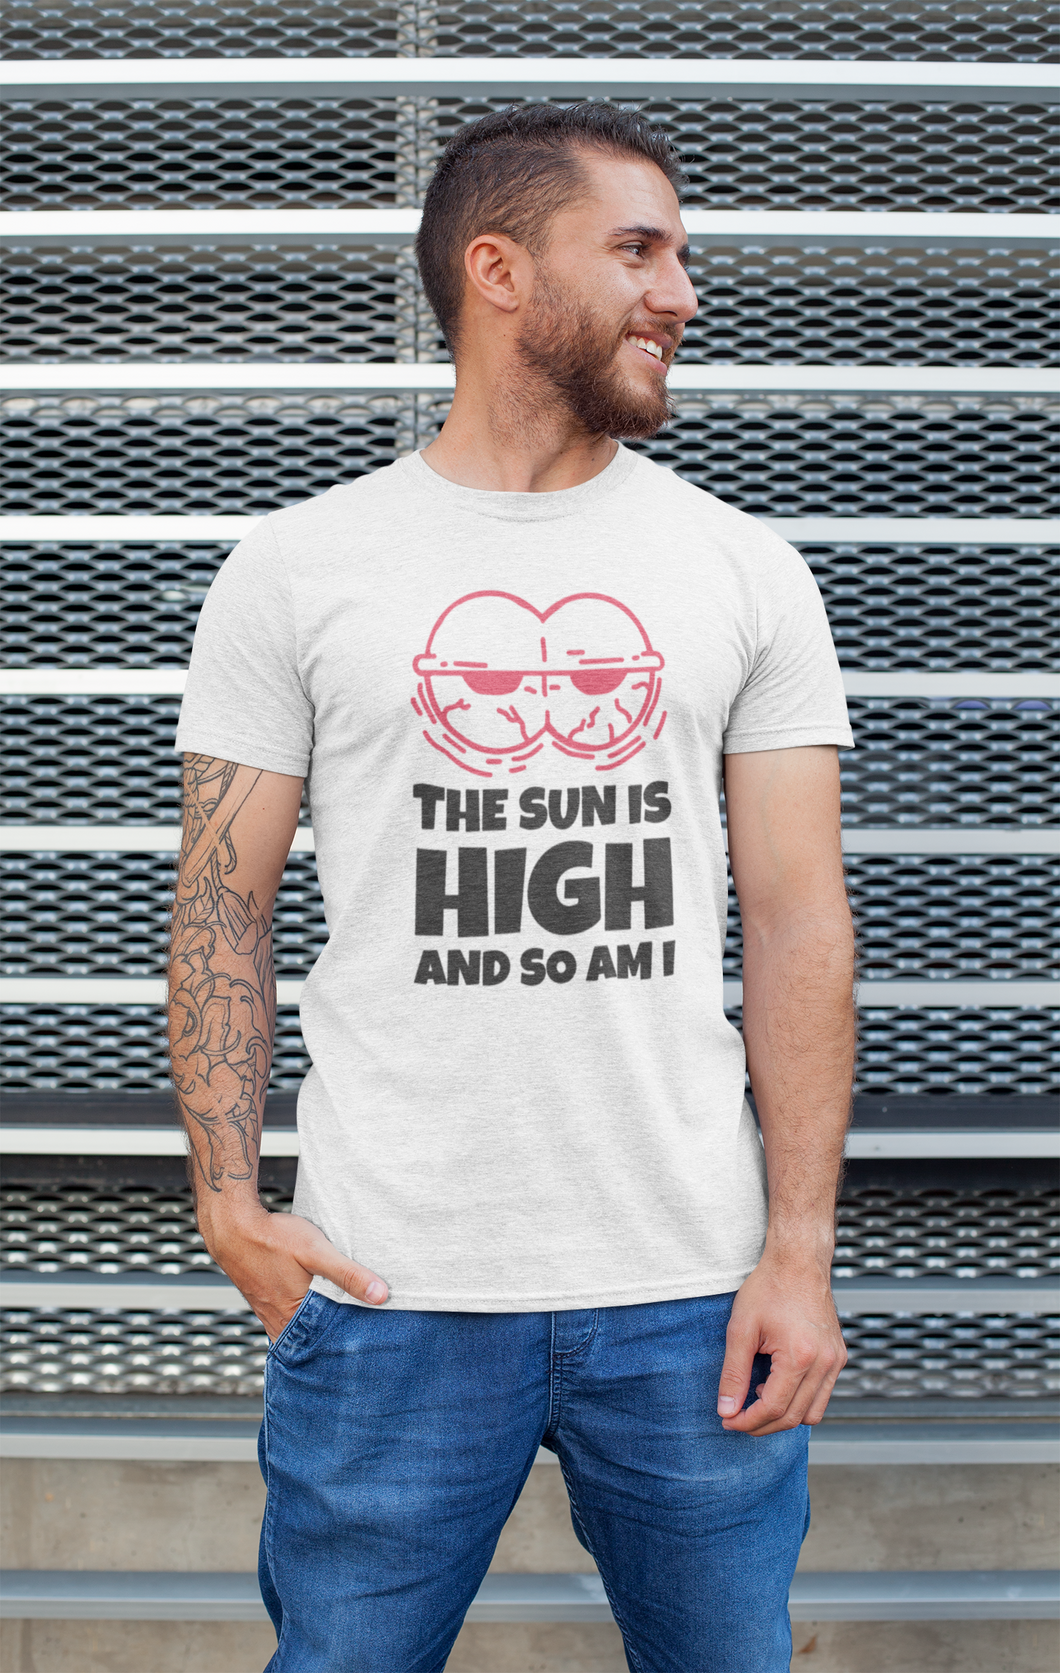 The Sun is High and so am I T-Shirt